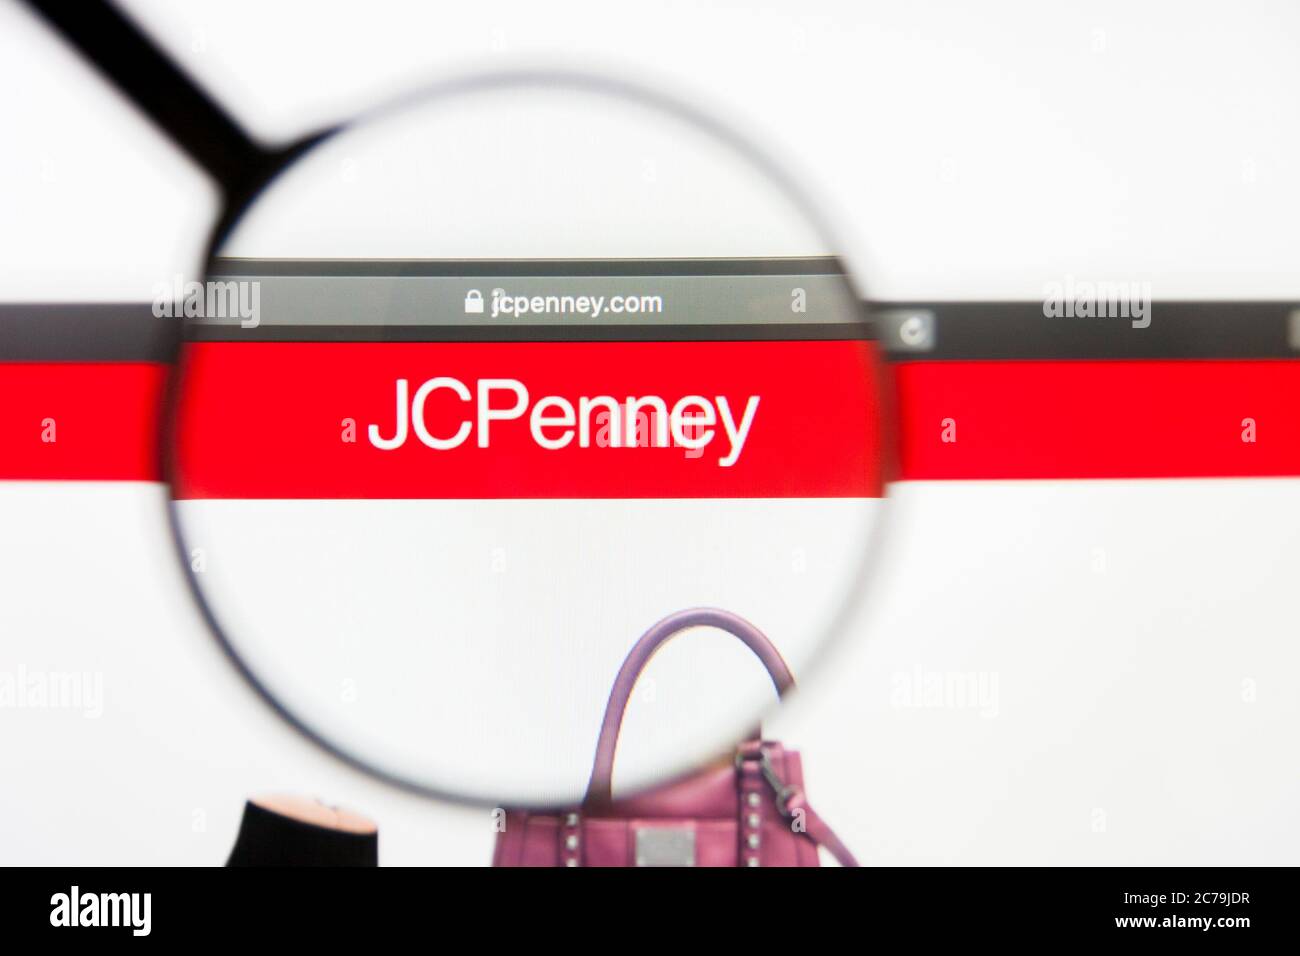 Los Angeles, California, USA - 10 March 2019: Illustrative Editorial, JC Penney website homepage. JC Penney logo visible on display screen Stock Photo